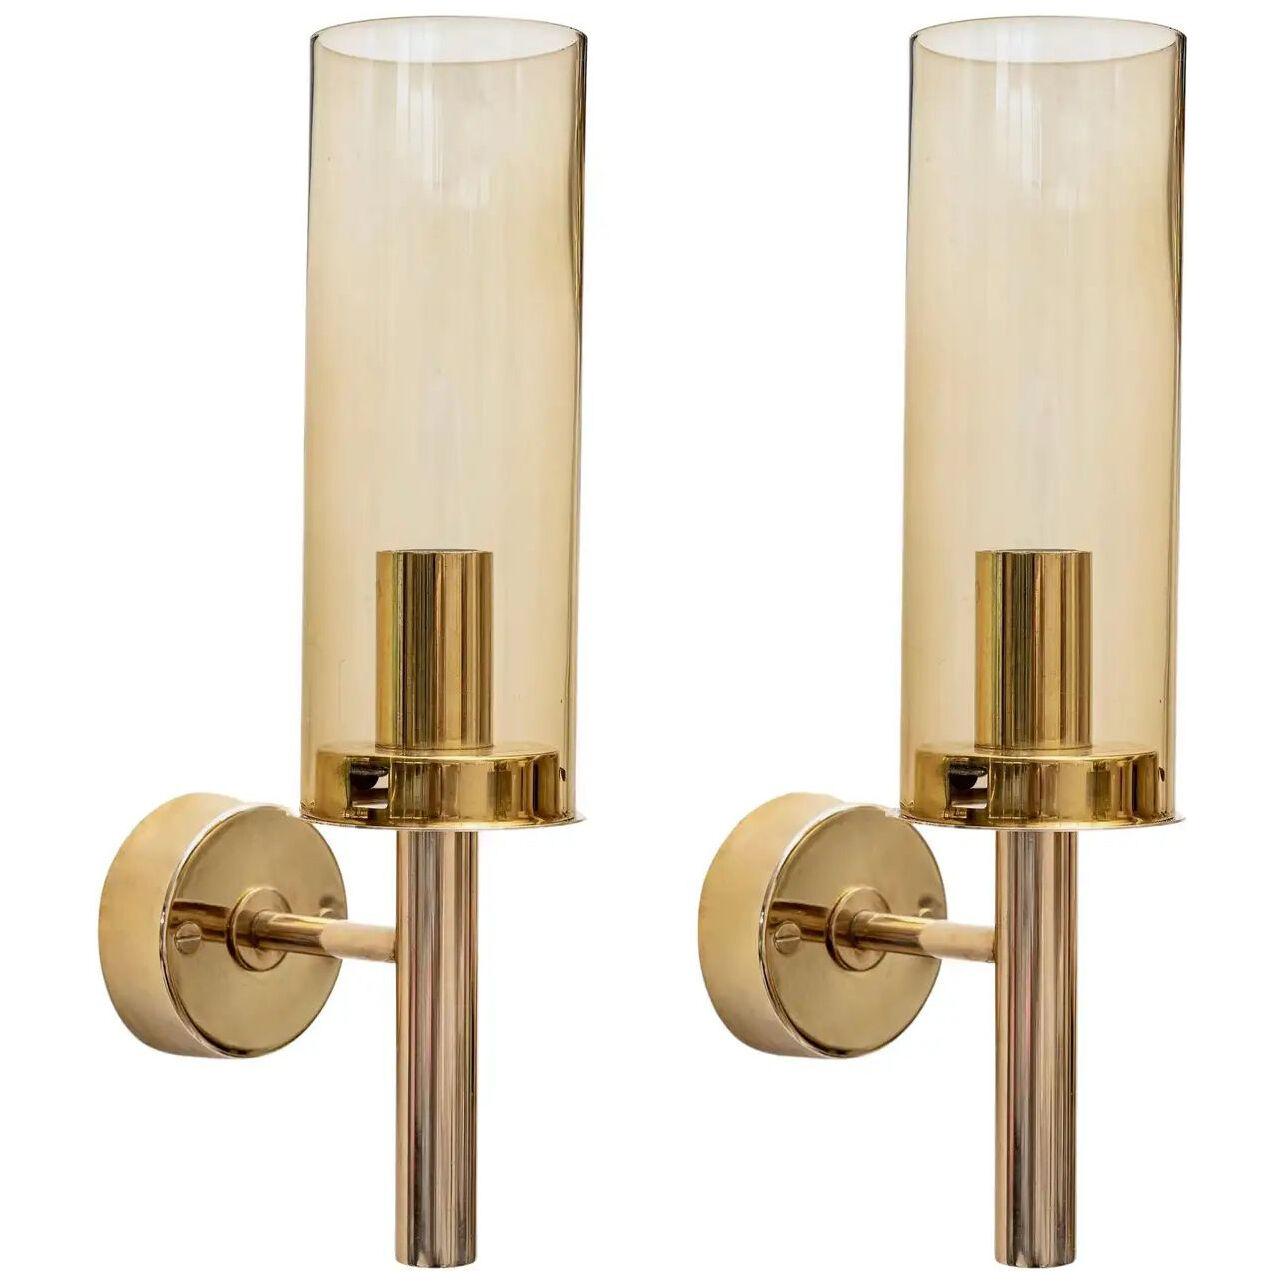 1960 Pair of Sconces by Hans-Agne Jakobsson